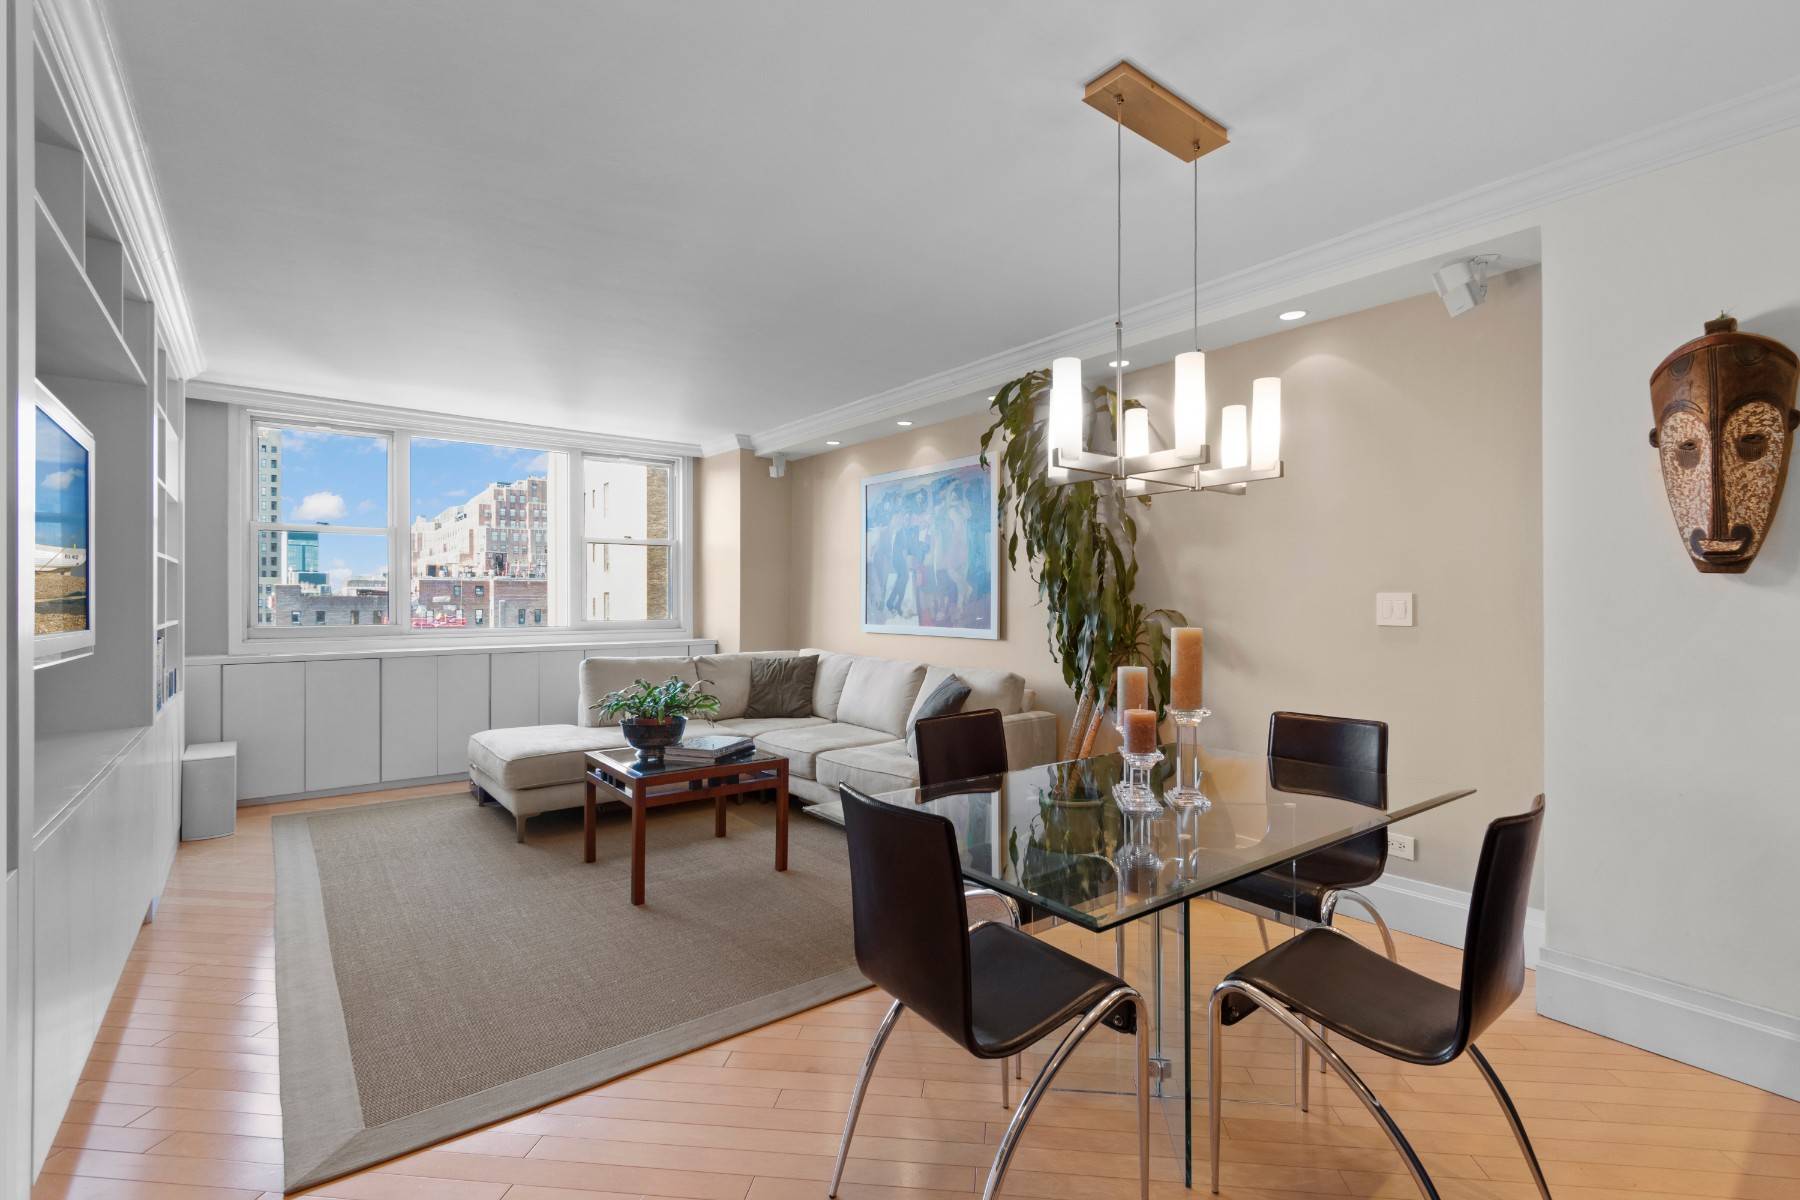 Move right in to this renovated, bright and spacious unit in the heart of Chelsea, at the crossroads of the West Village and Meatpacking.